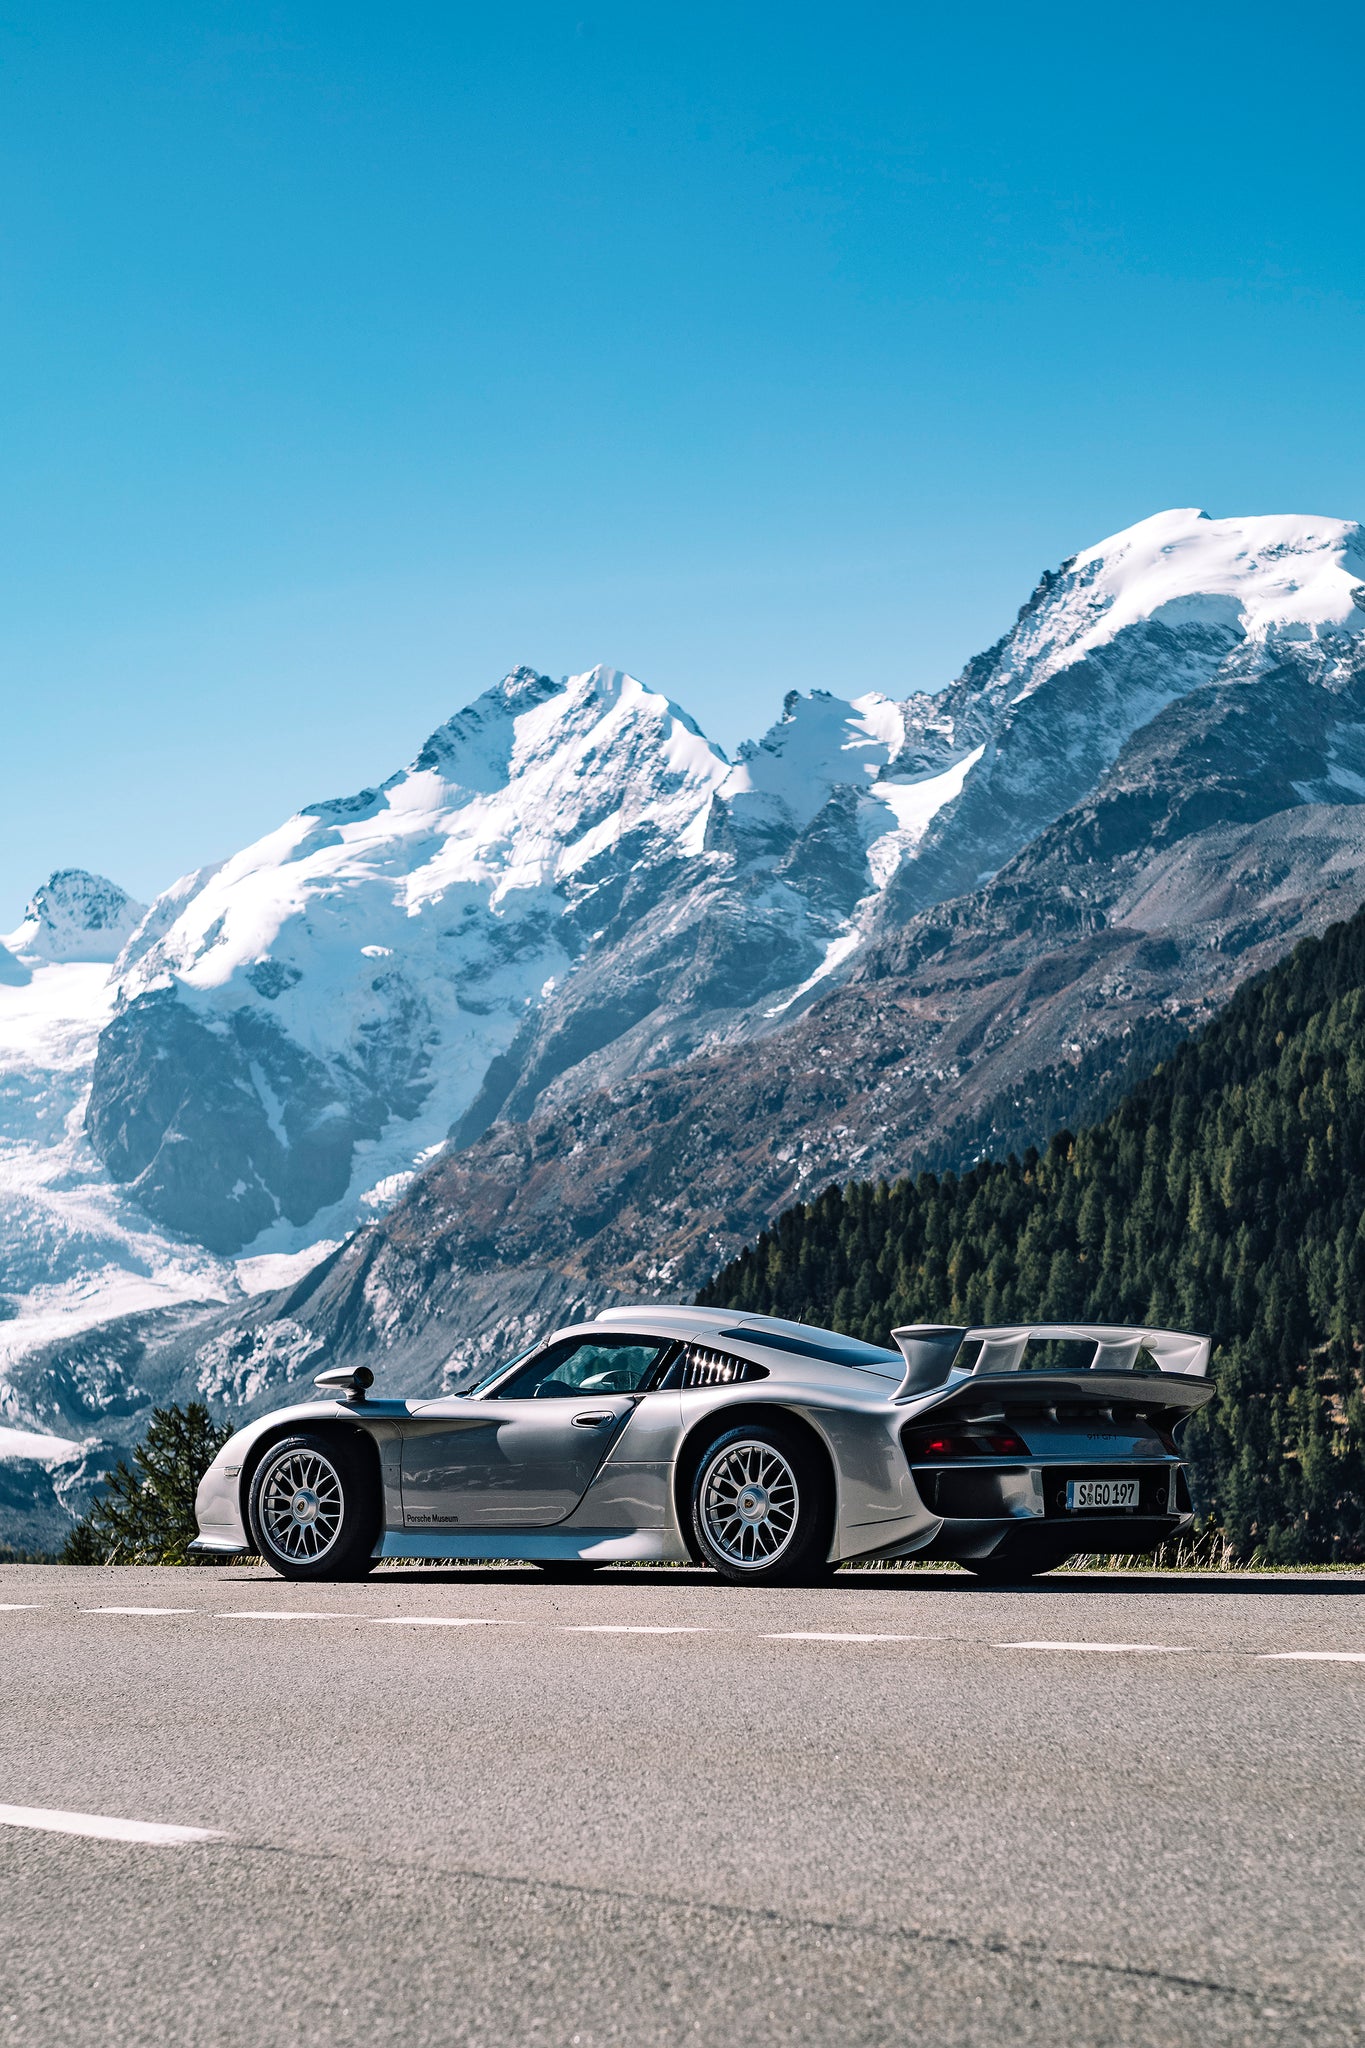 GT1 Goes to St. Moritz